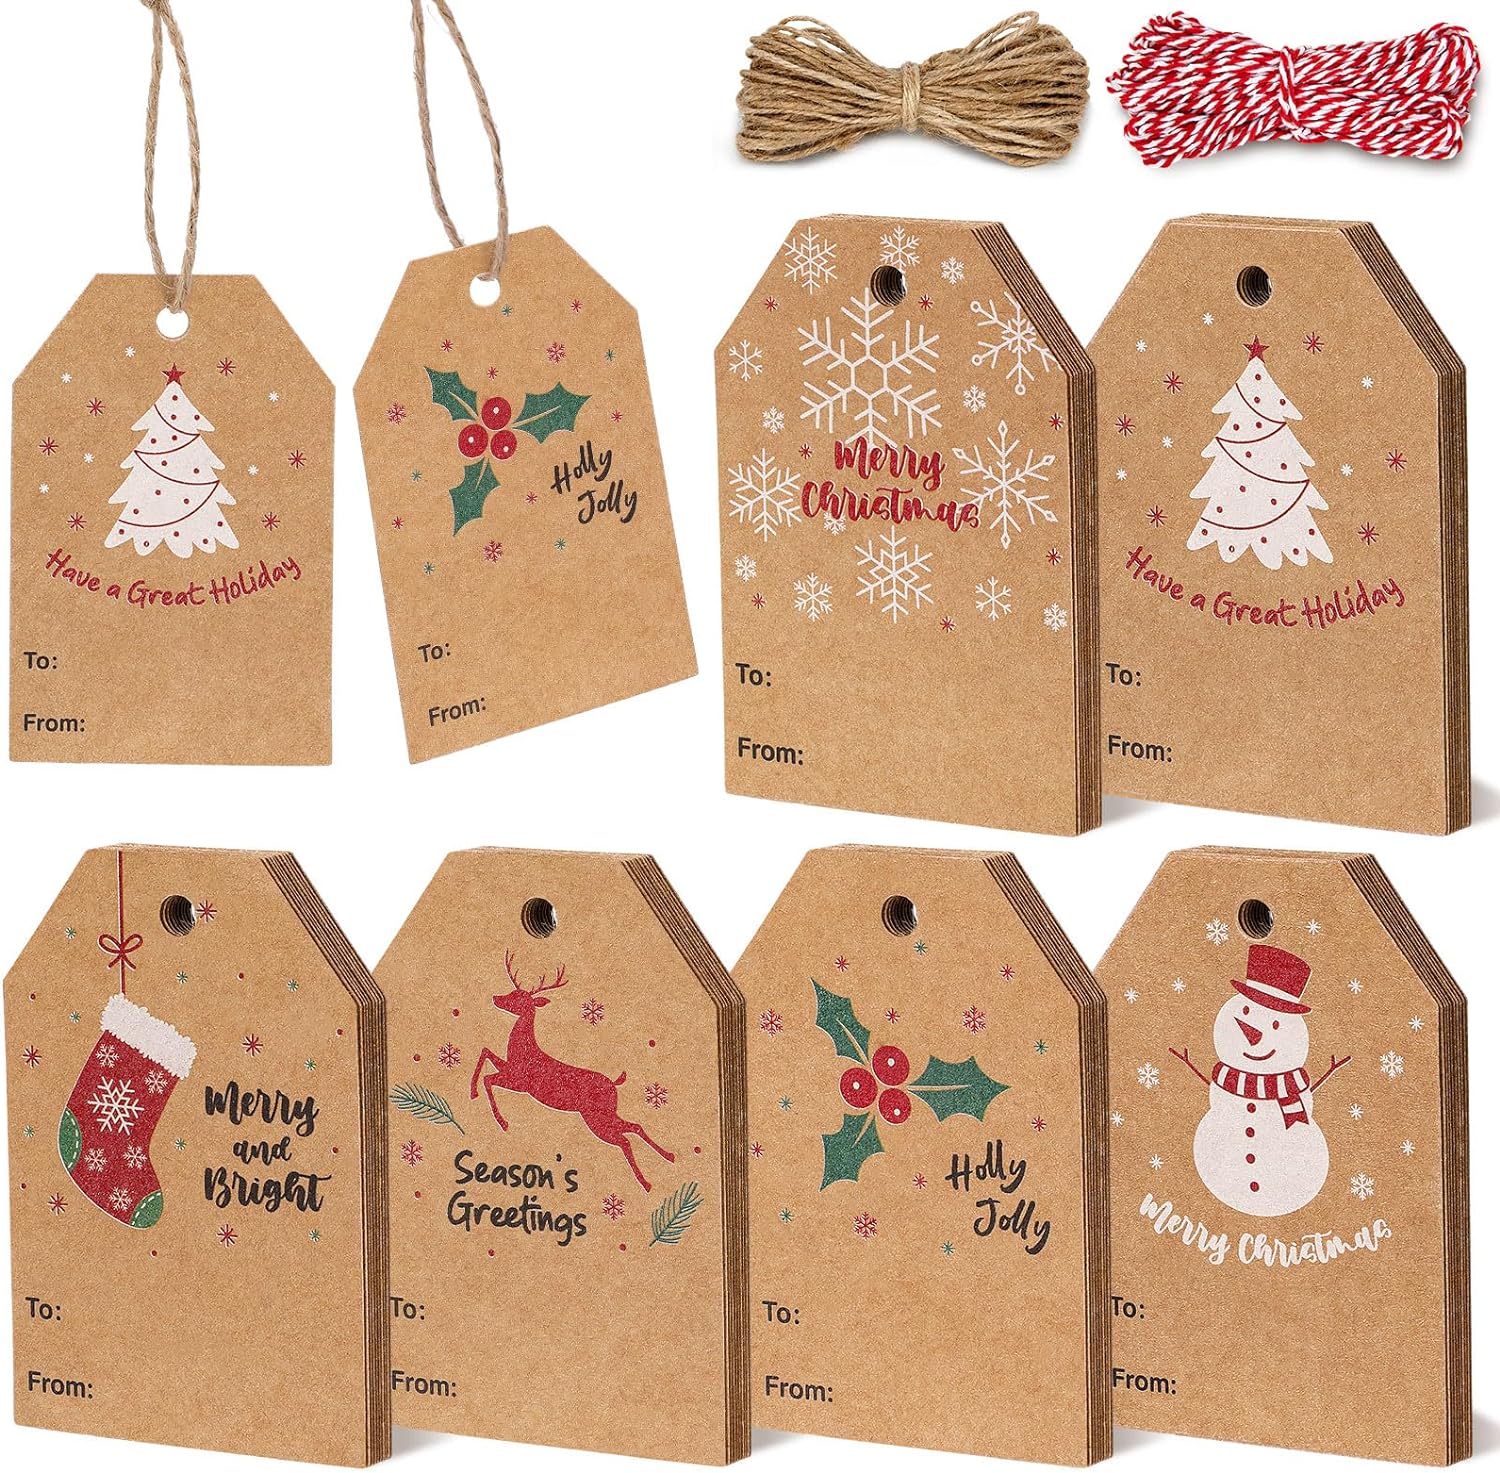 Blisstime Christmas Gift Tags with String 60pcs Twine for Gift Wrapping, Brown Gift Tags for Christmas Presents, Kraft Paper Tags Christmas Packaging